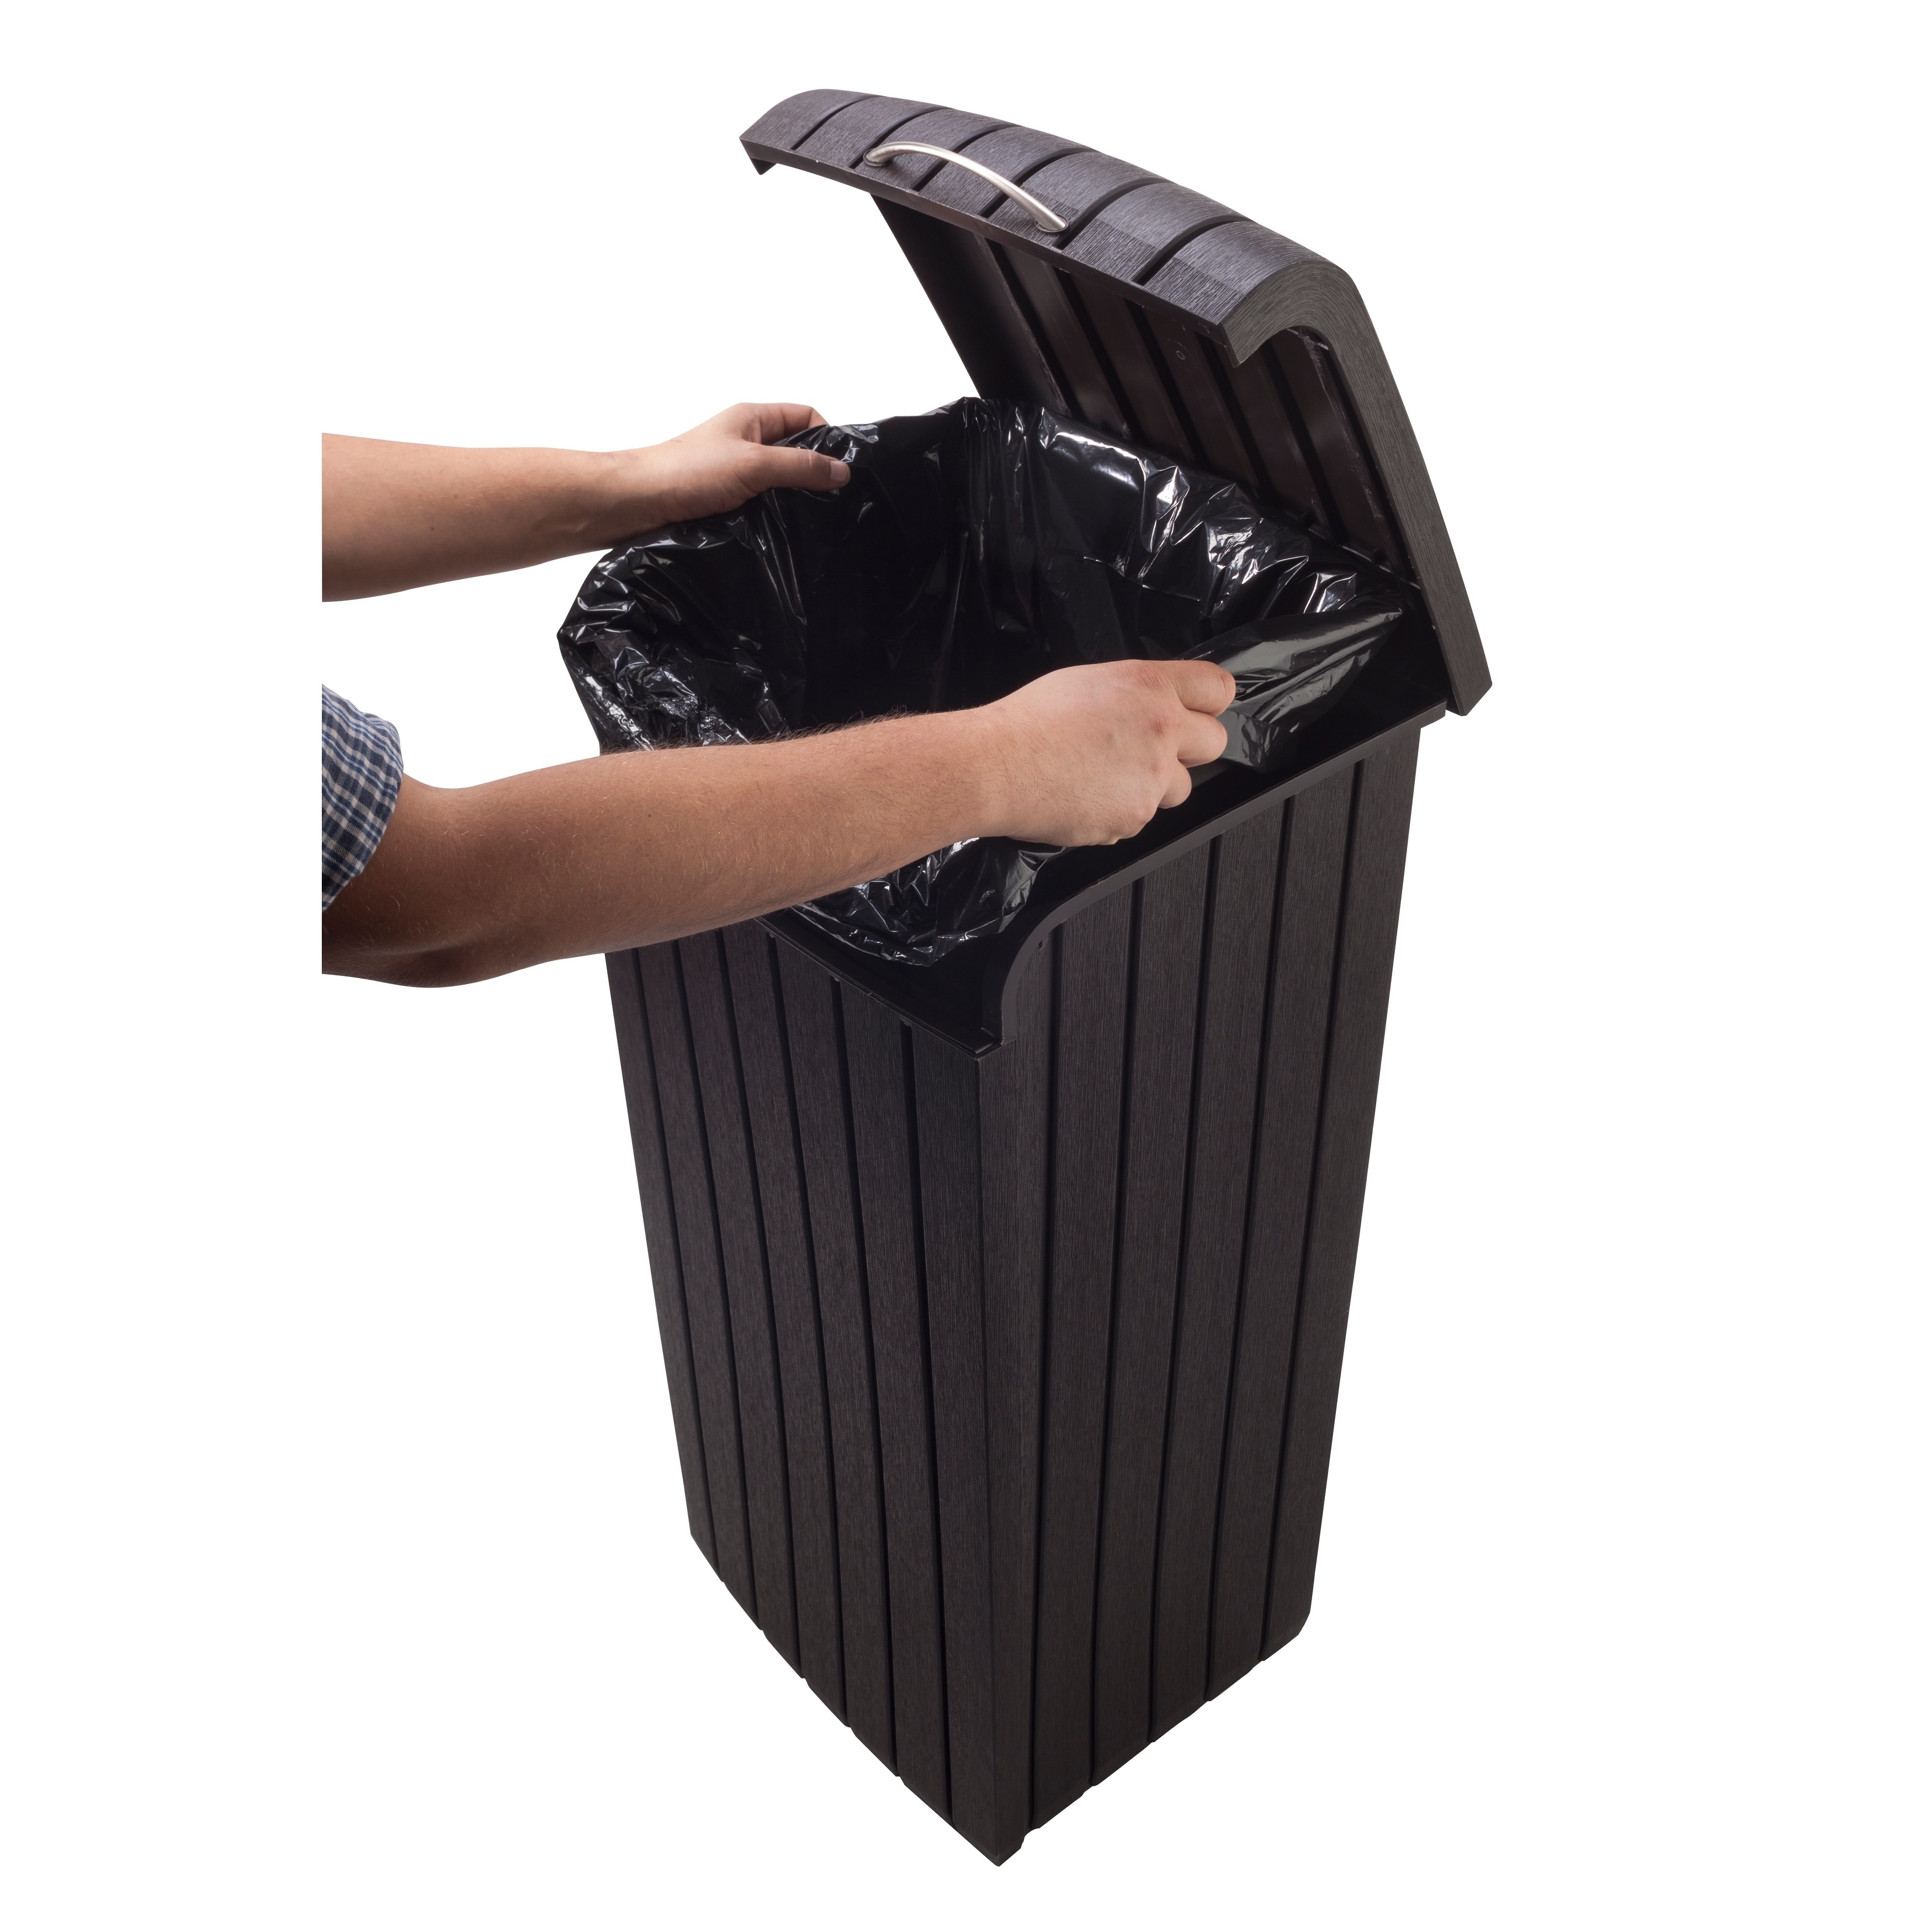 https://ak1.ostkcdn.com/images/products/30780300/Keter-Copenhagen-32-Gallon-Indoor-Outdoor-Trashcan-with-Lid-cf7d25ab-a92e-4934-8af4-446f48968ff6.jpg